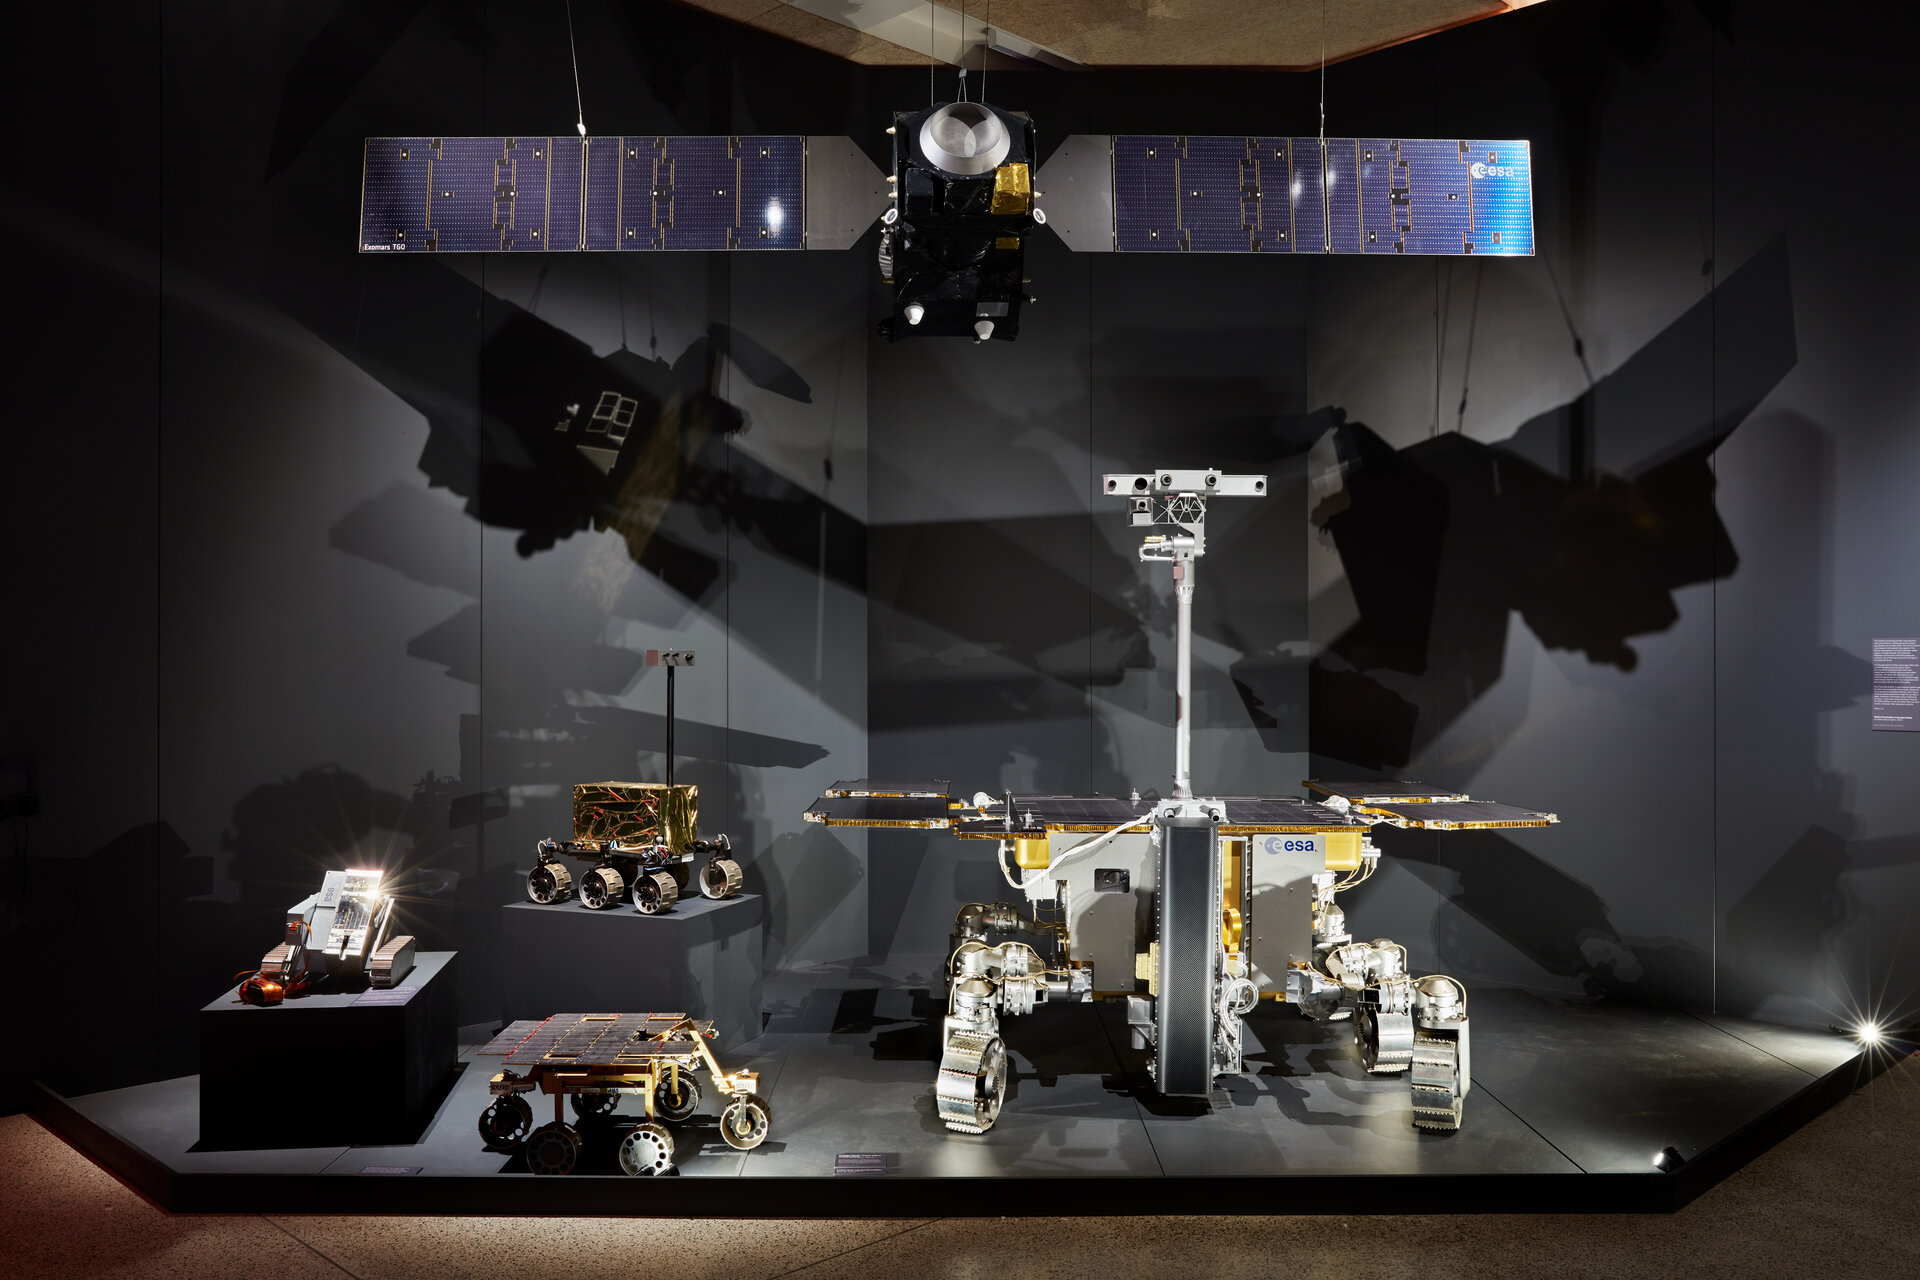 ESA rovers including ExoMars Rosalind Franklin at the Design Museum in London